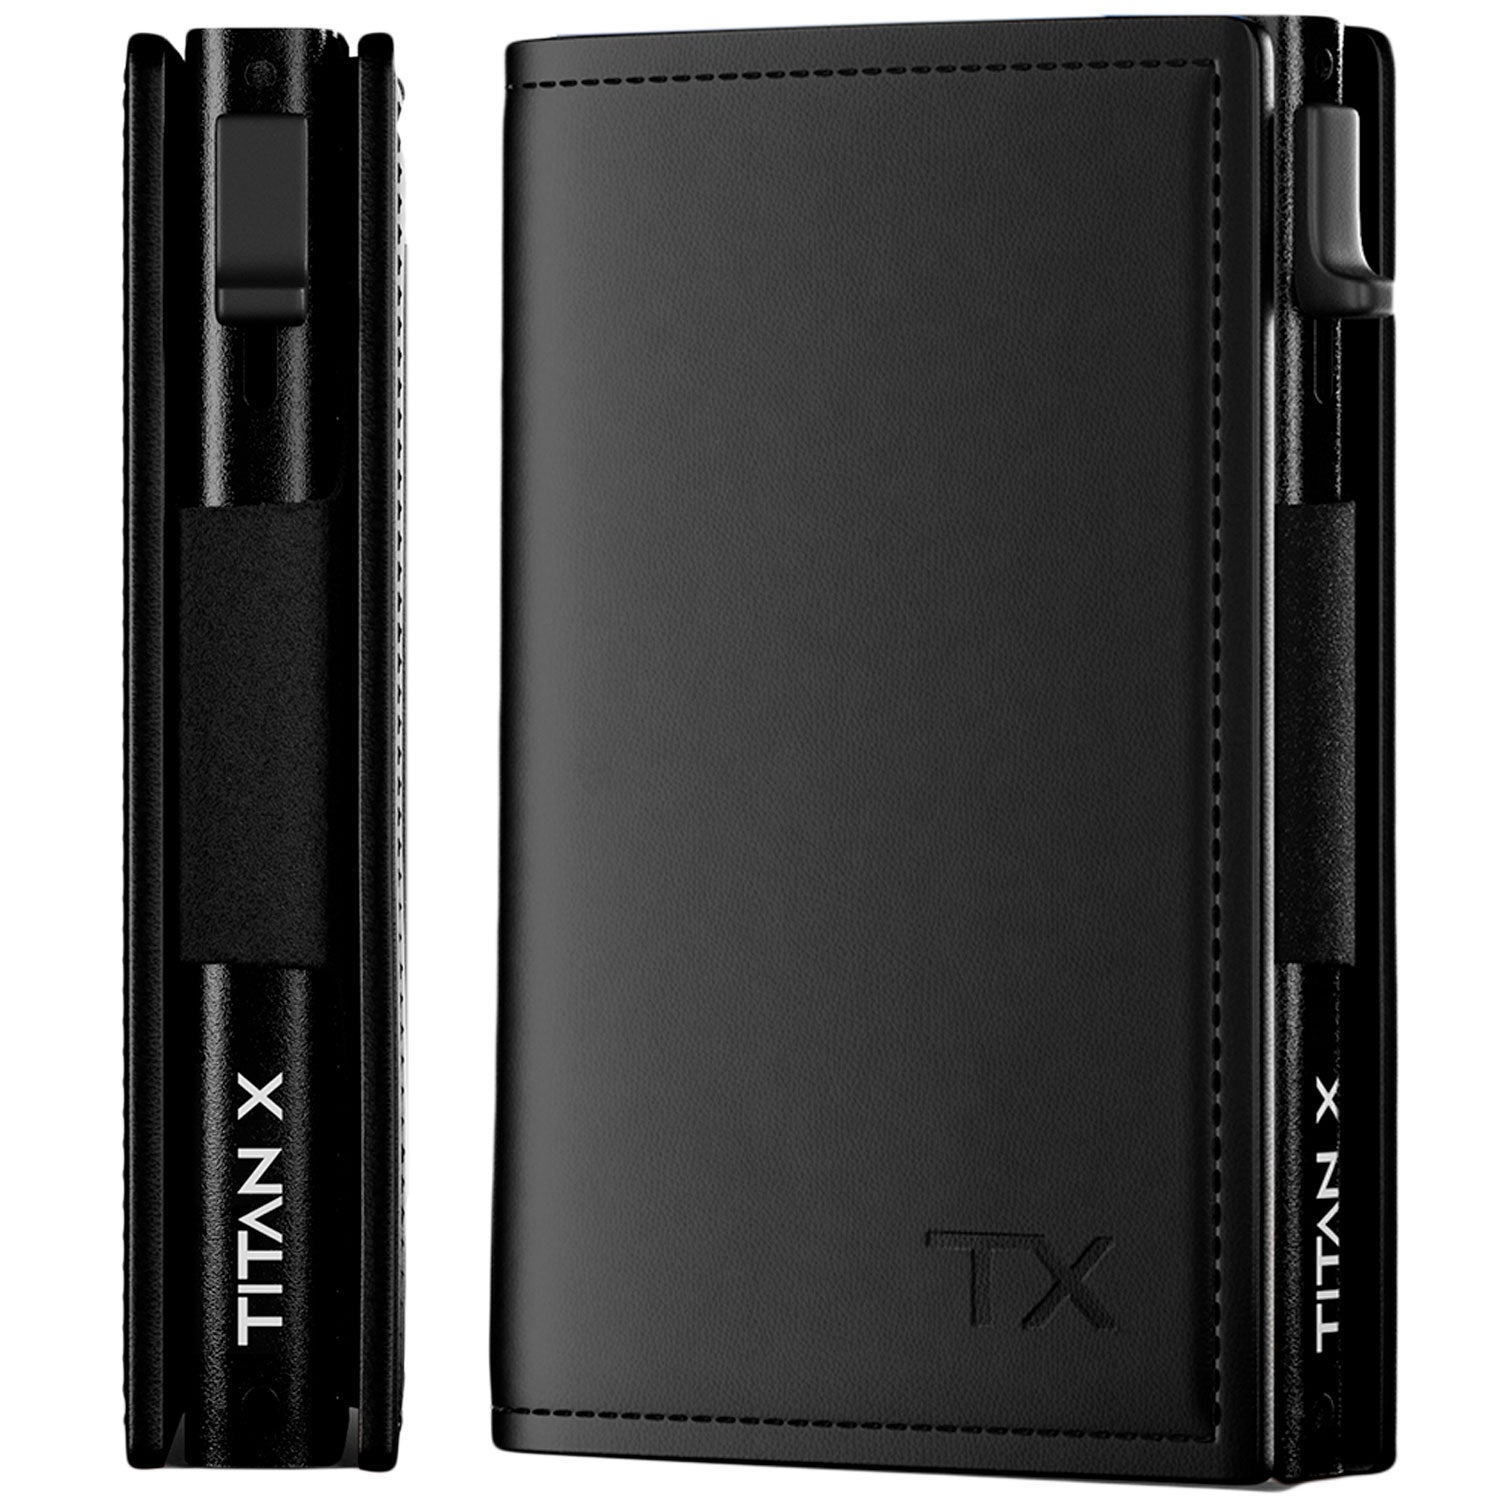 TITAN X, Trifold Edition Side and Front View, Black Leather